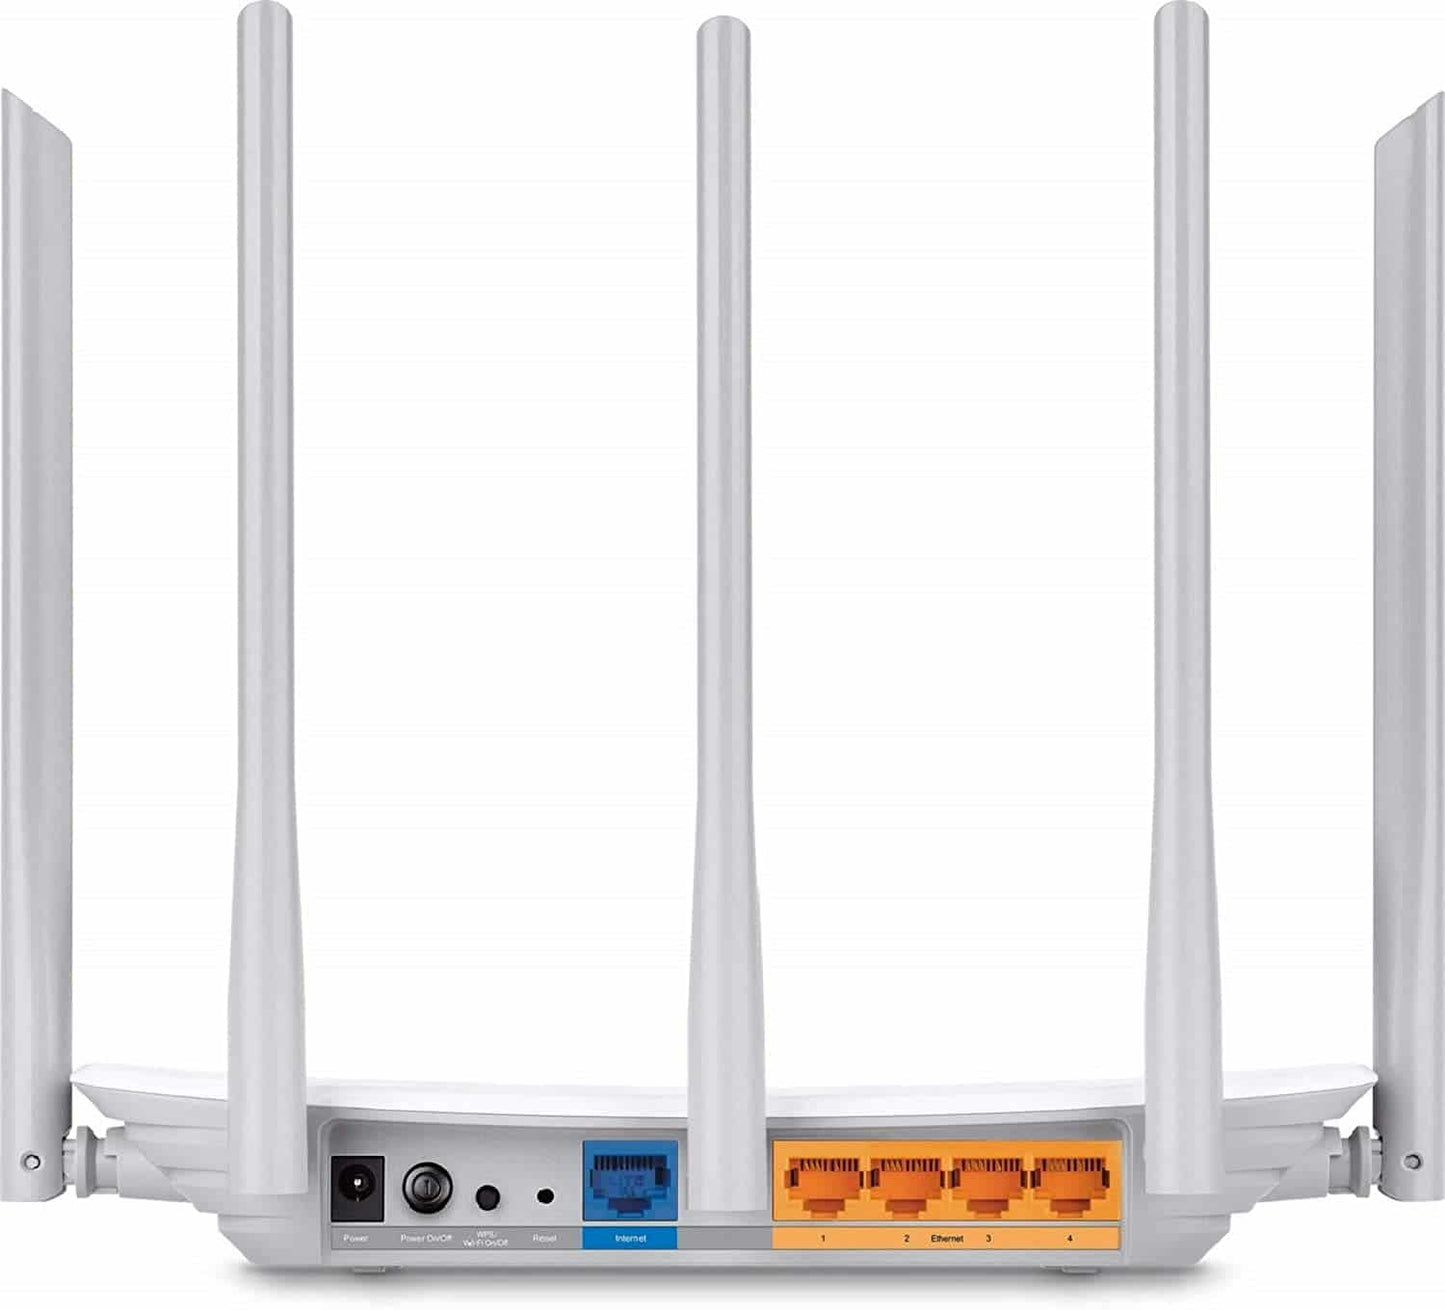 TP-Link AC1350 Wireless Wi-Fi Dual-Band Gigabit Router